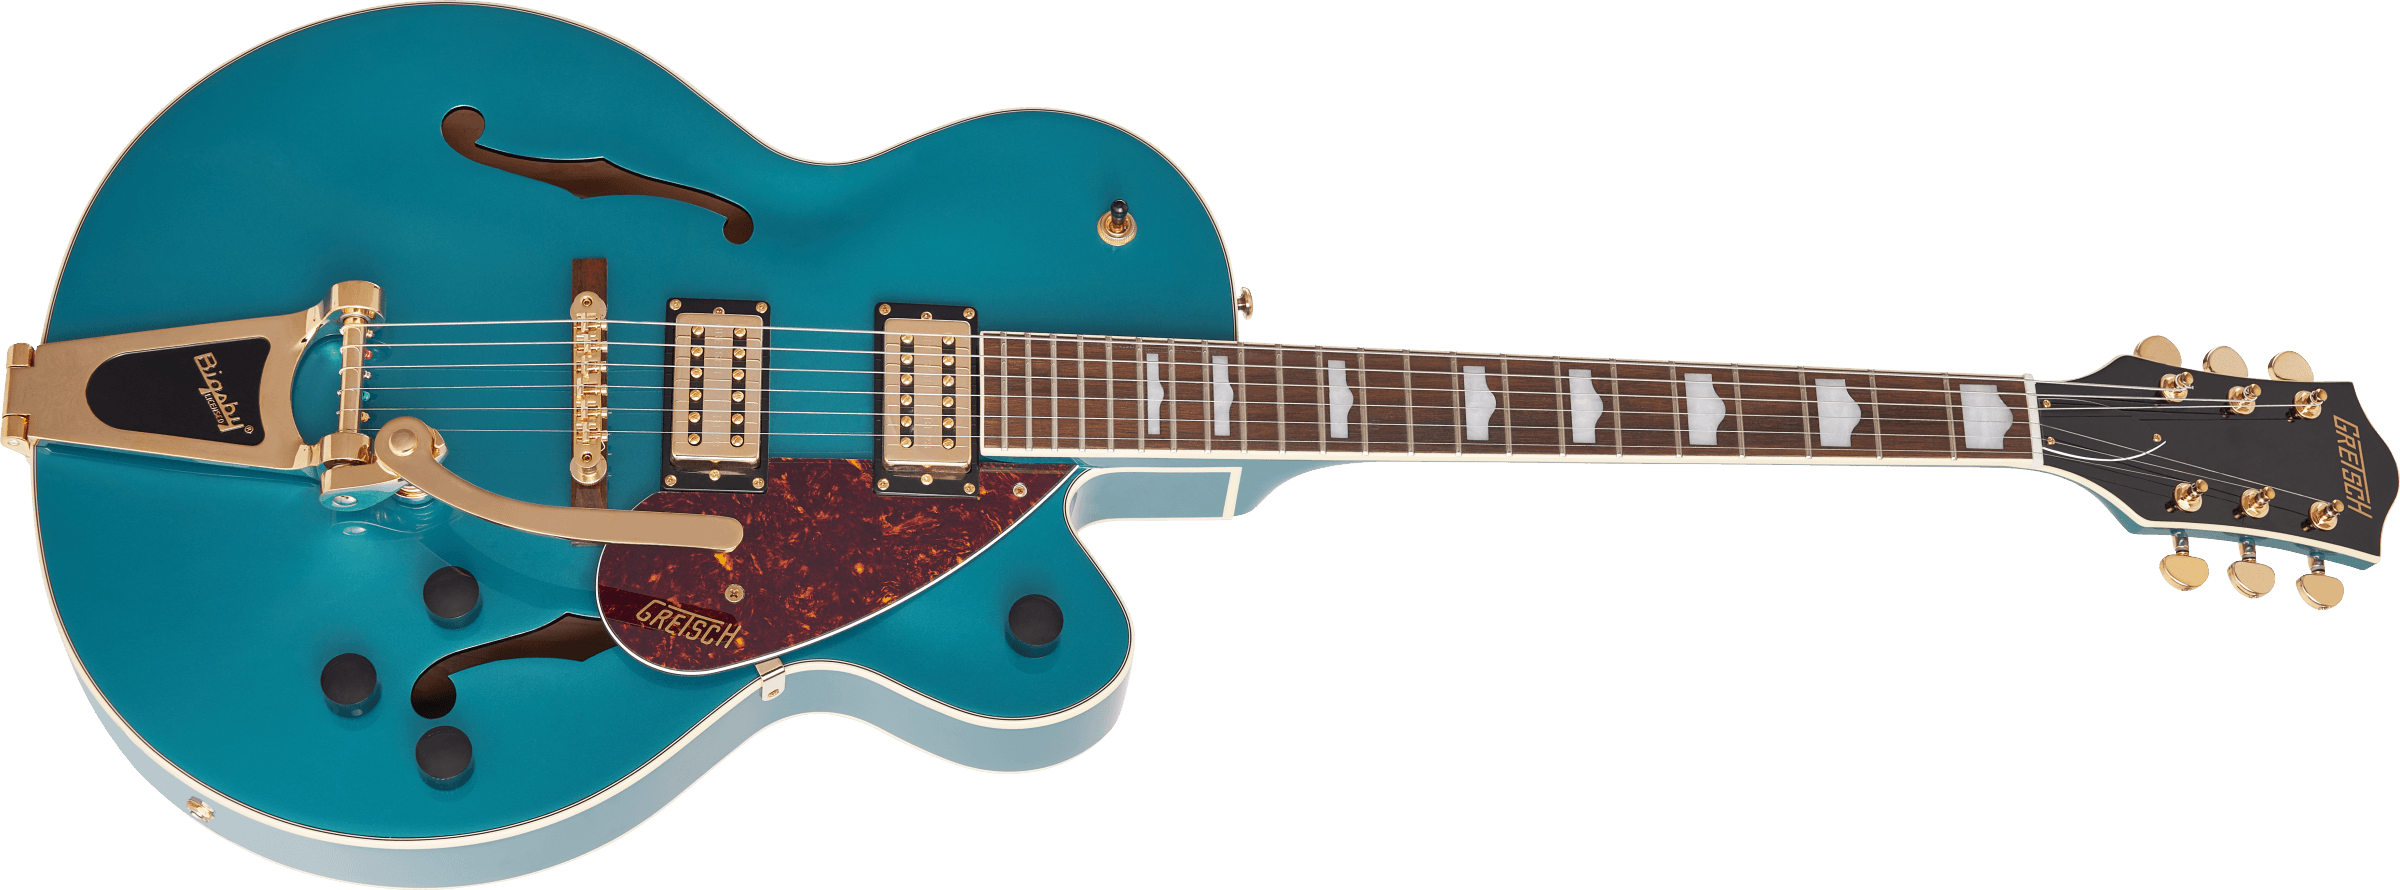 G2410TG Streamliner Hollow Body Single-Cut with Bigsby and Gold Hardware, Laurel Fingerboard, Ocean Turquoise追加画像